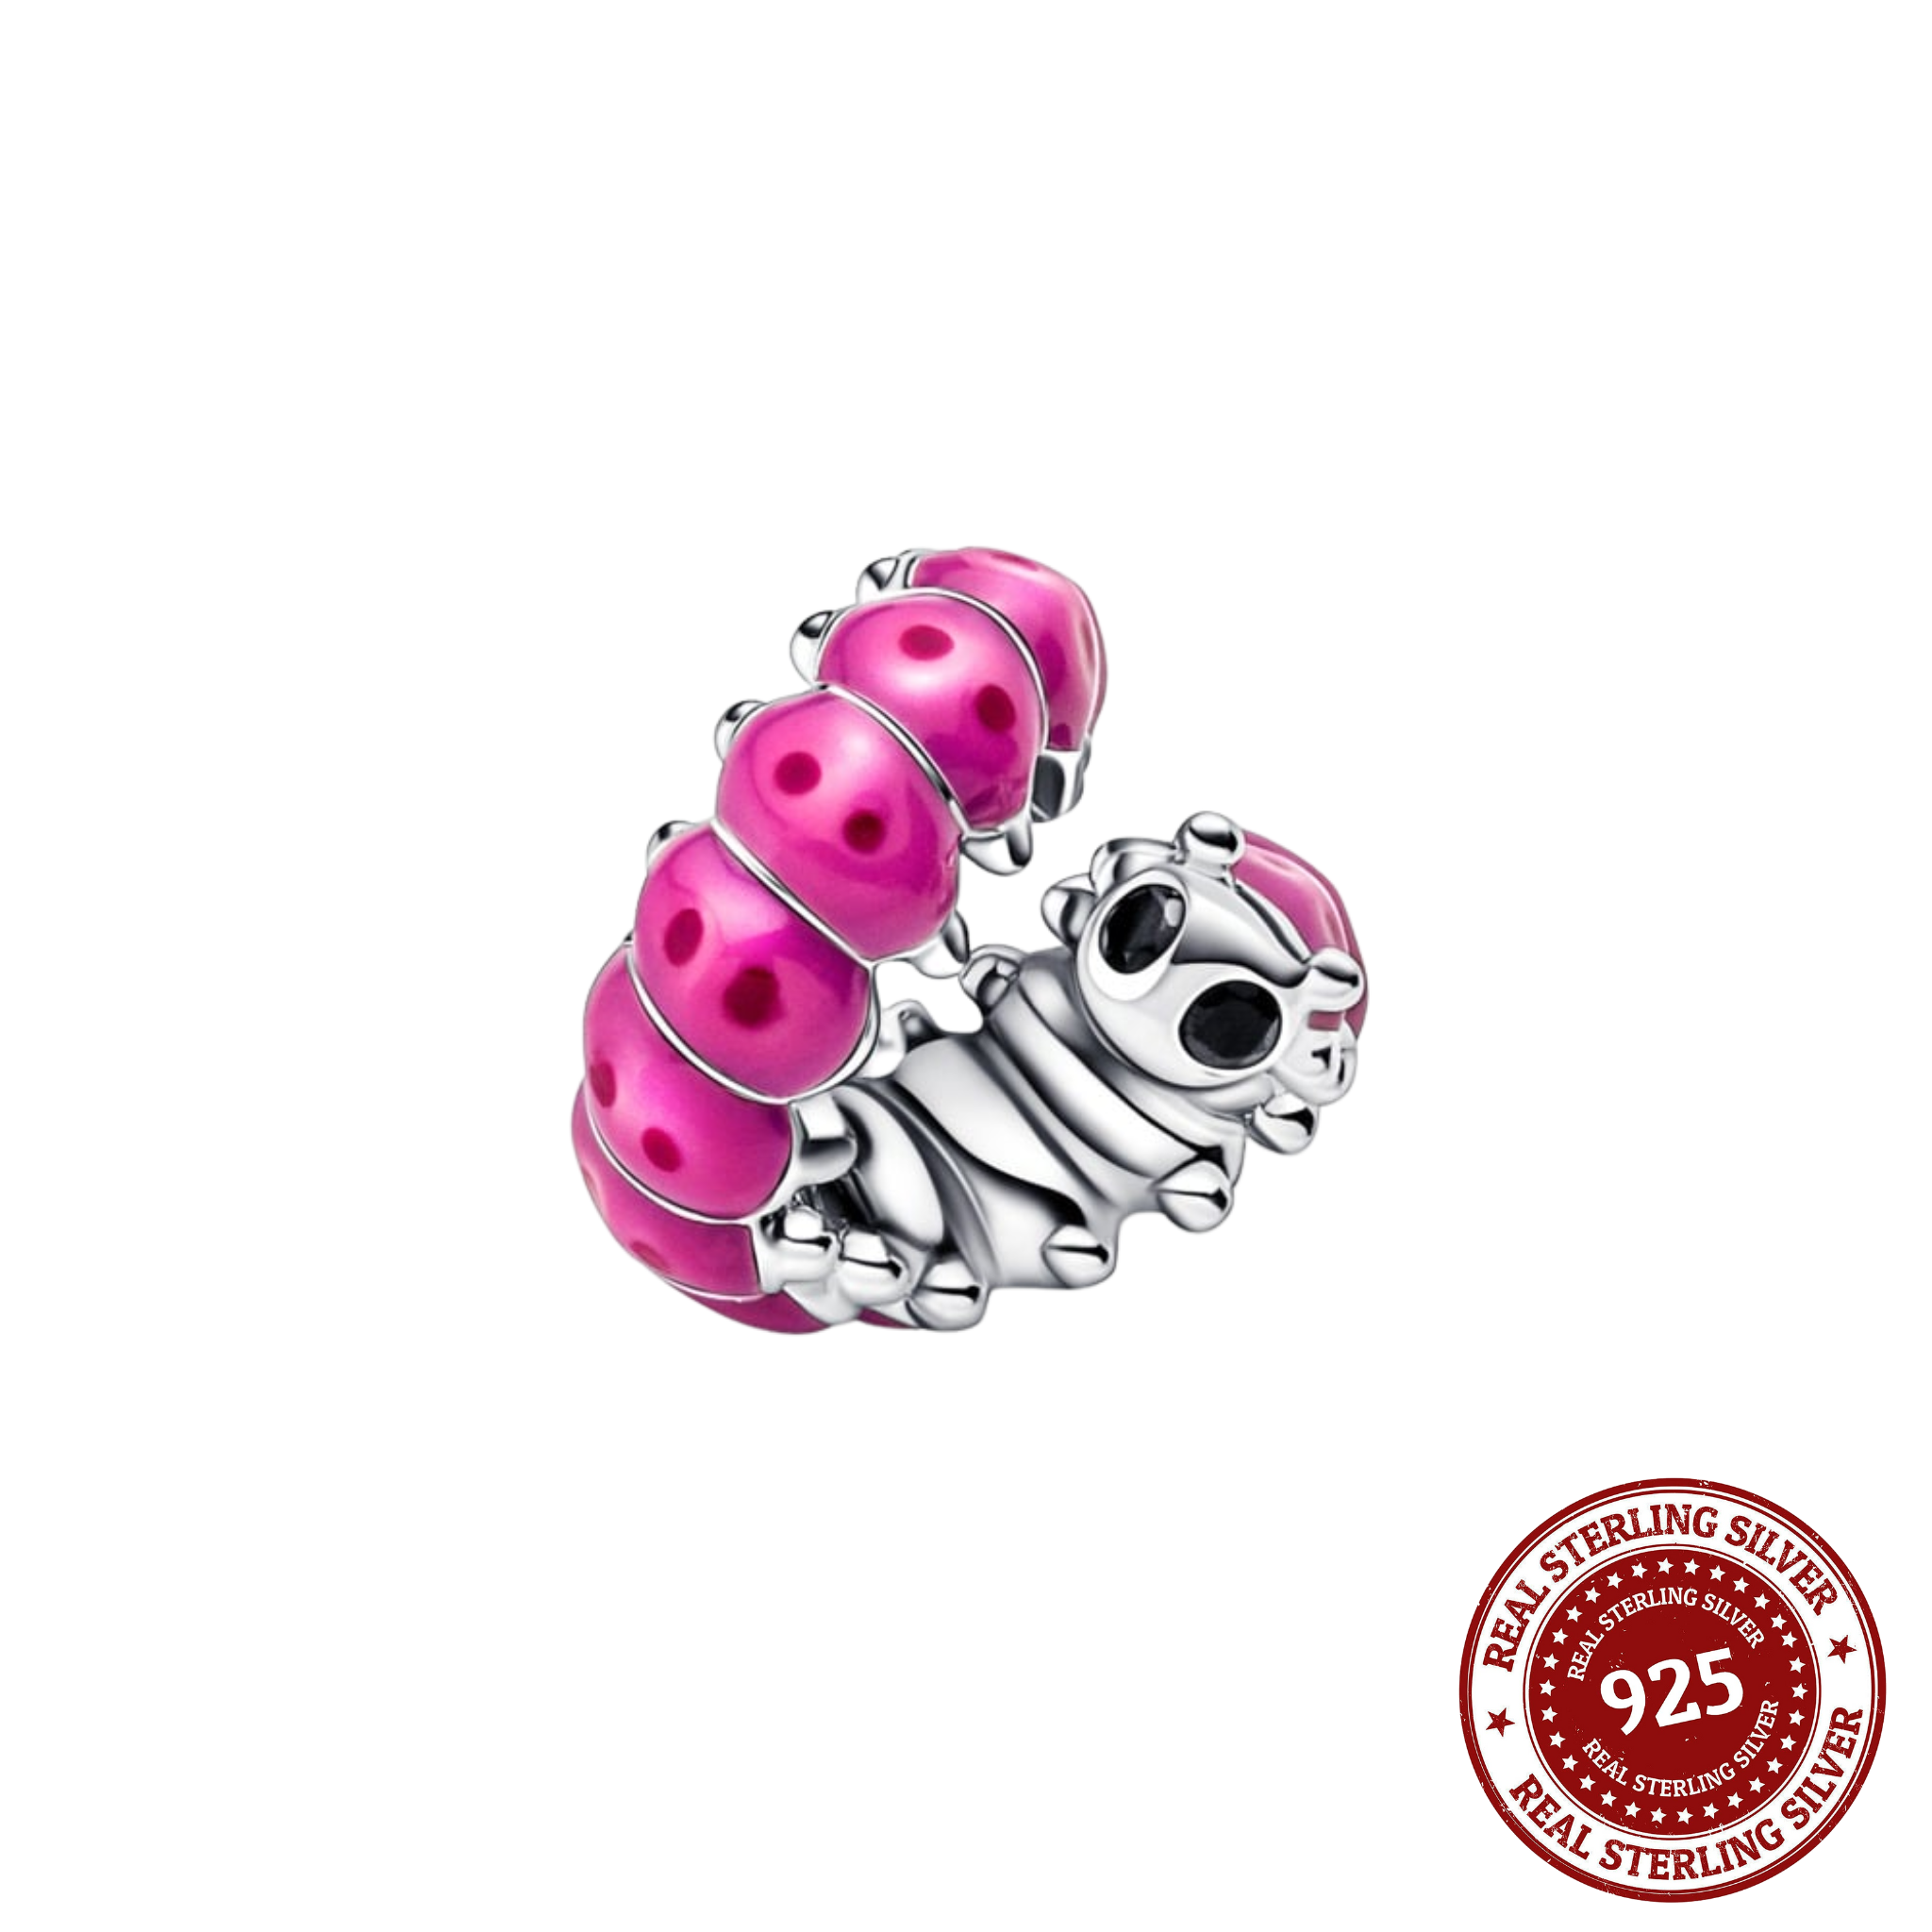 Pink Curled Caterpillar Charm